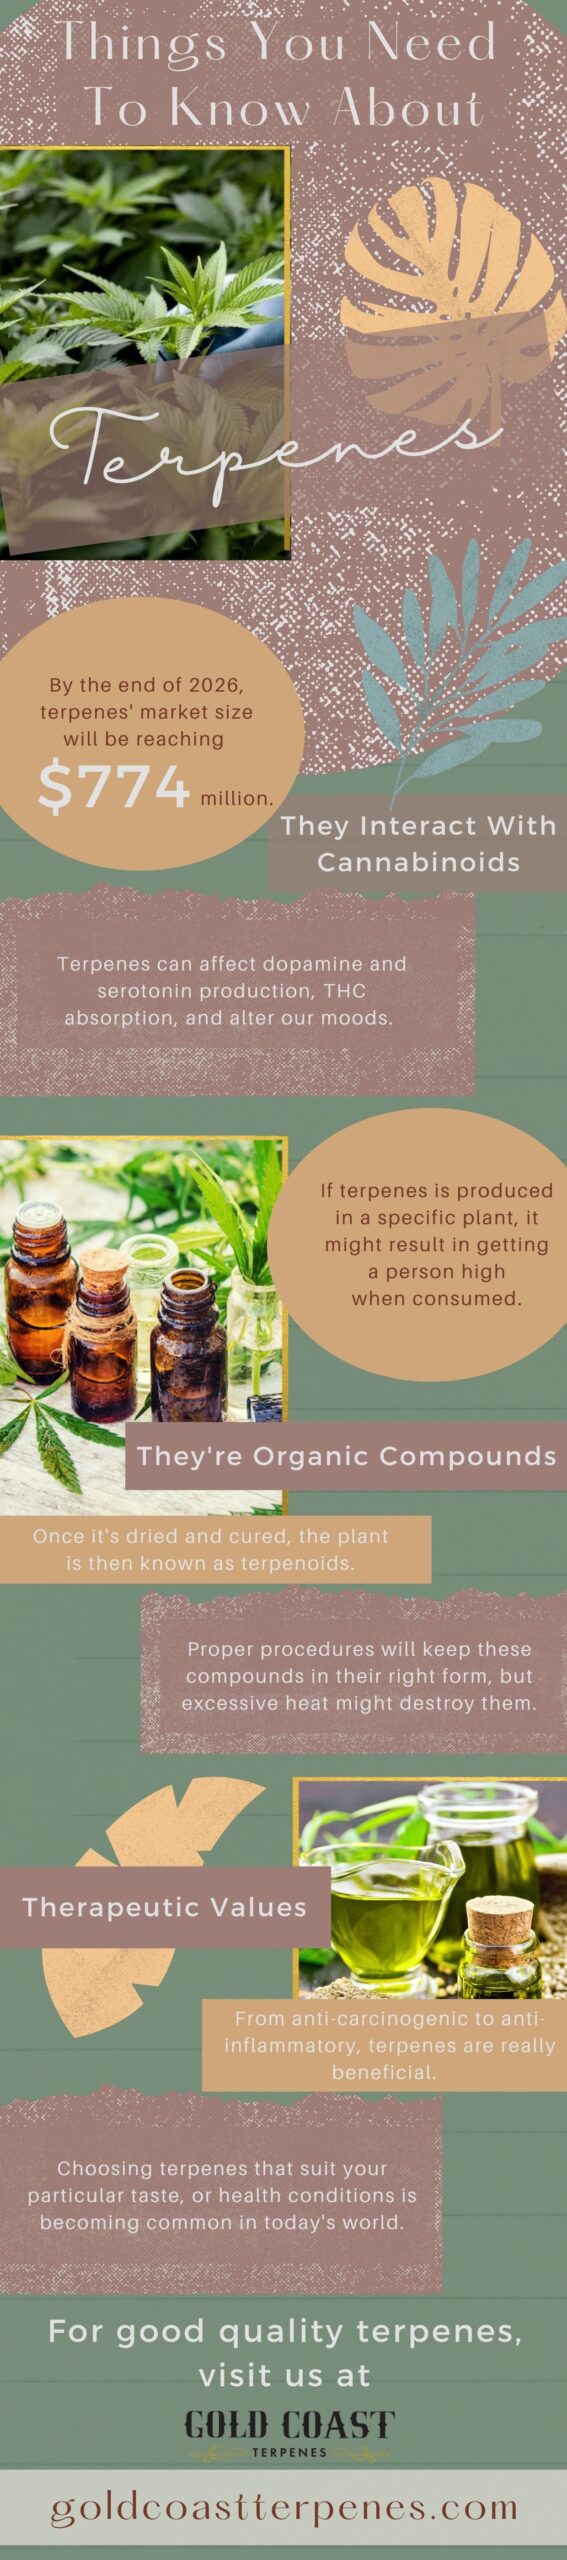 Things You Need To Know About Terpenes